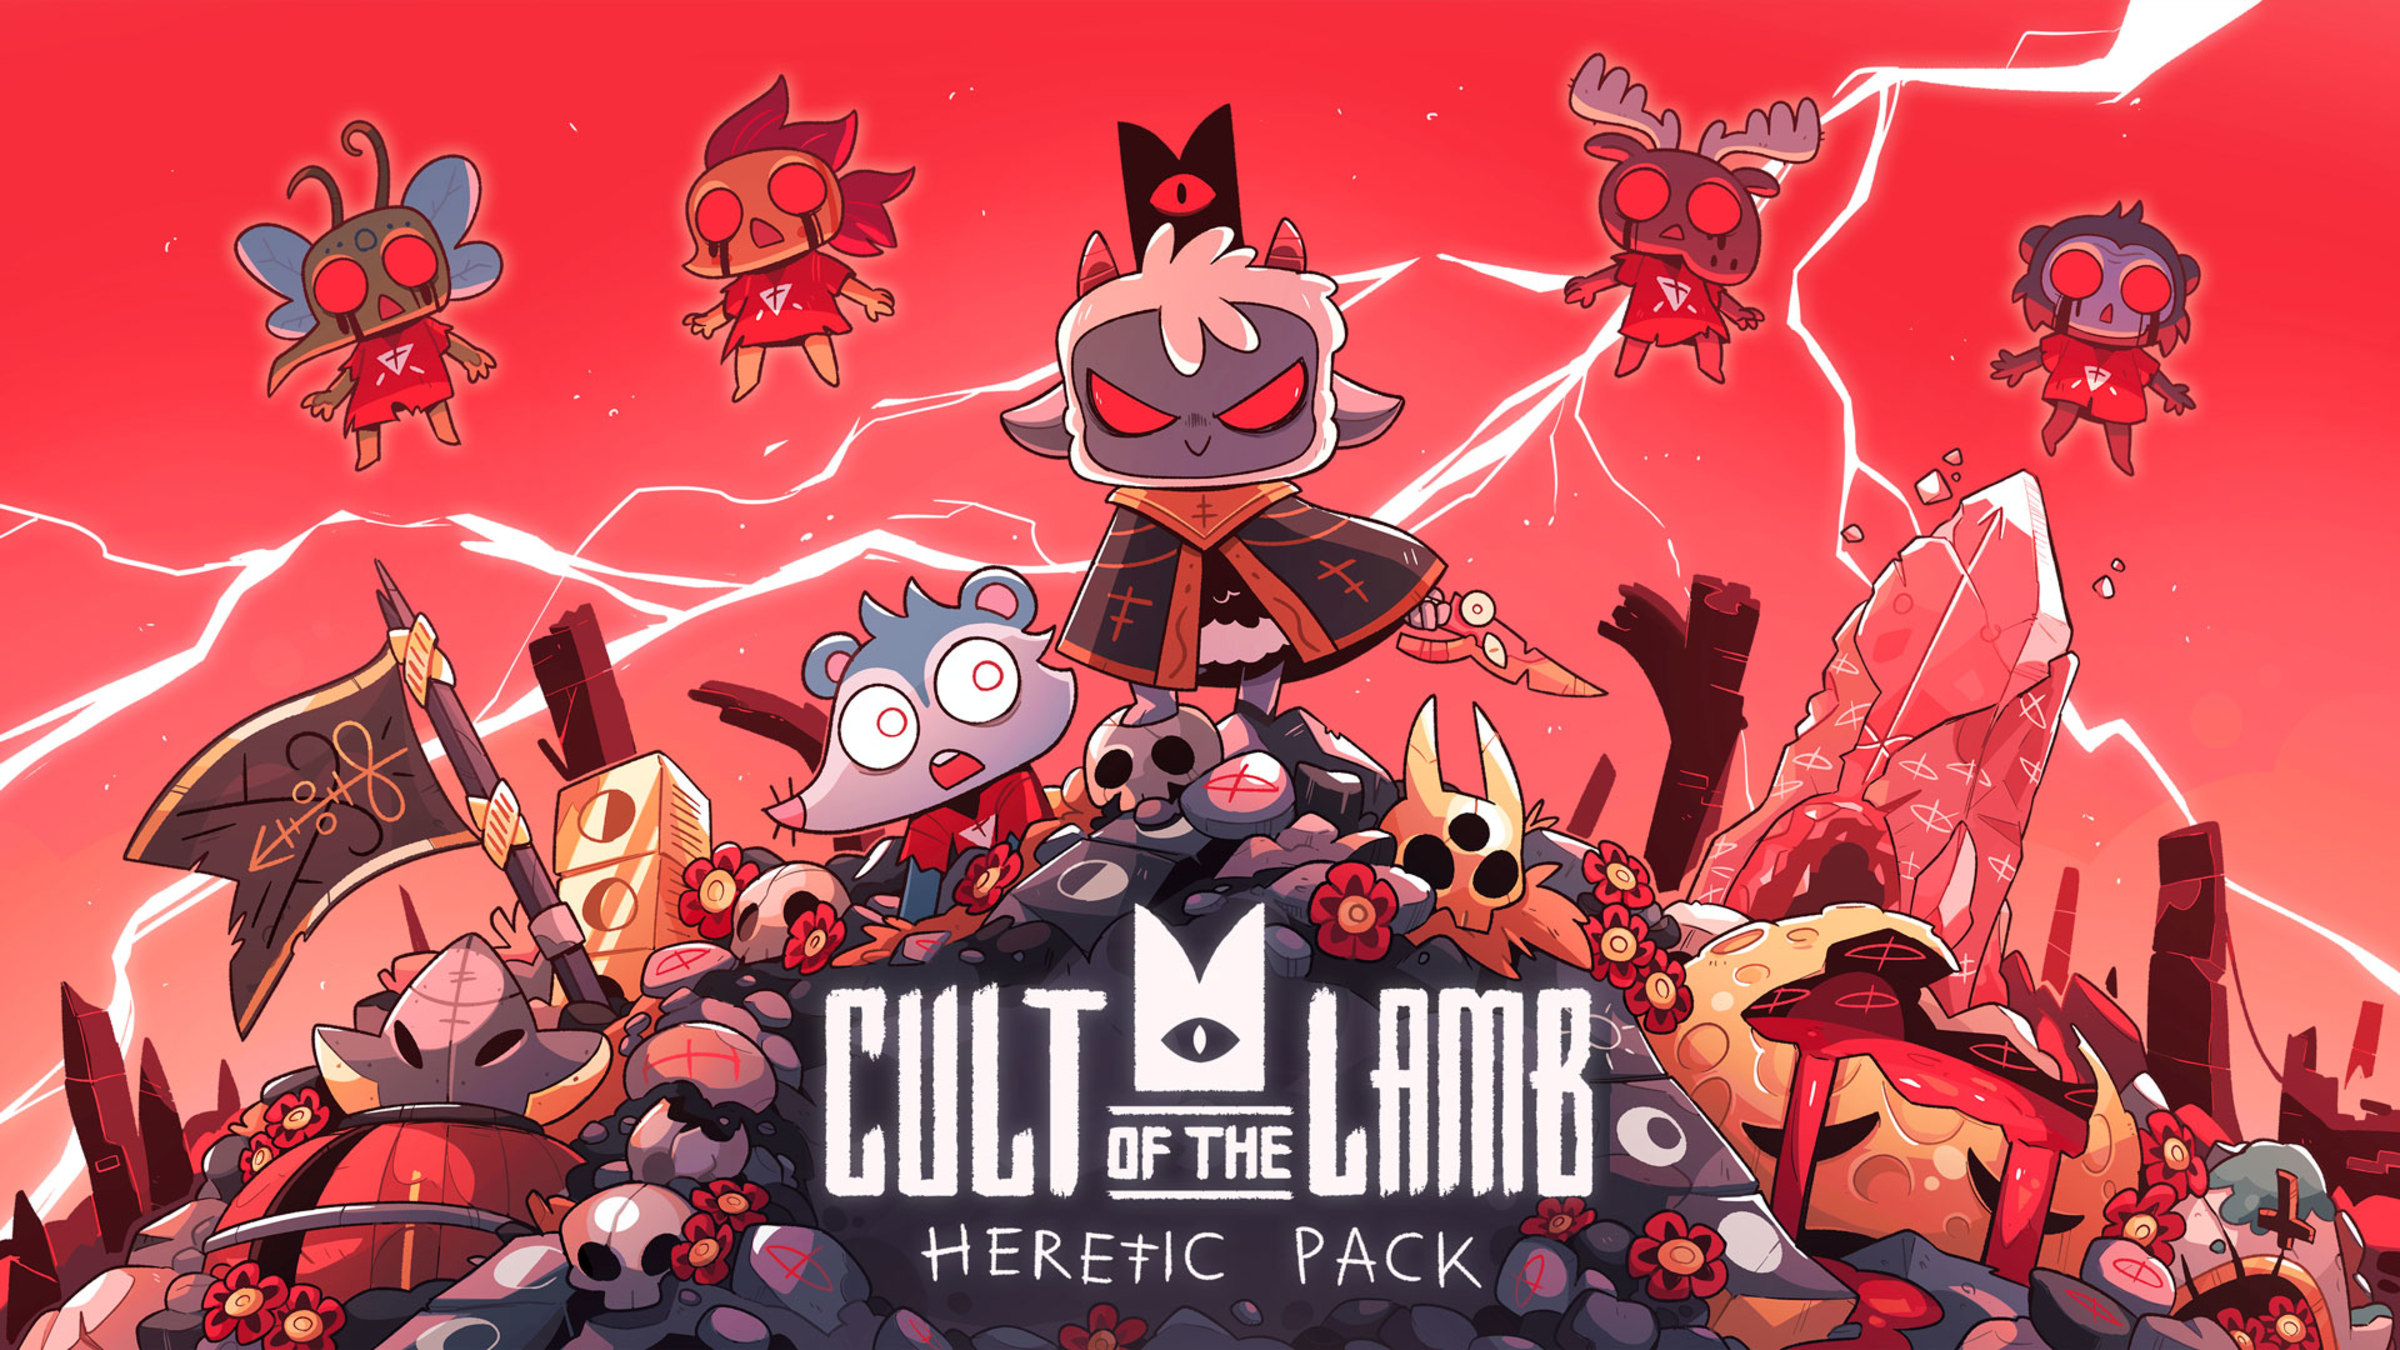 CULT OF THE LAMB [SWITCH SINGLE]